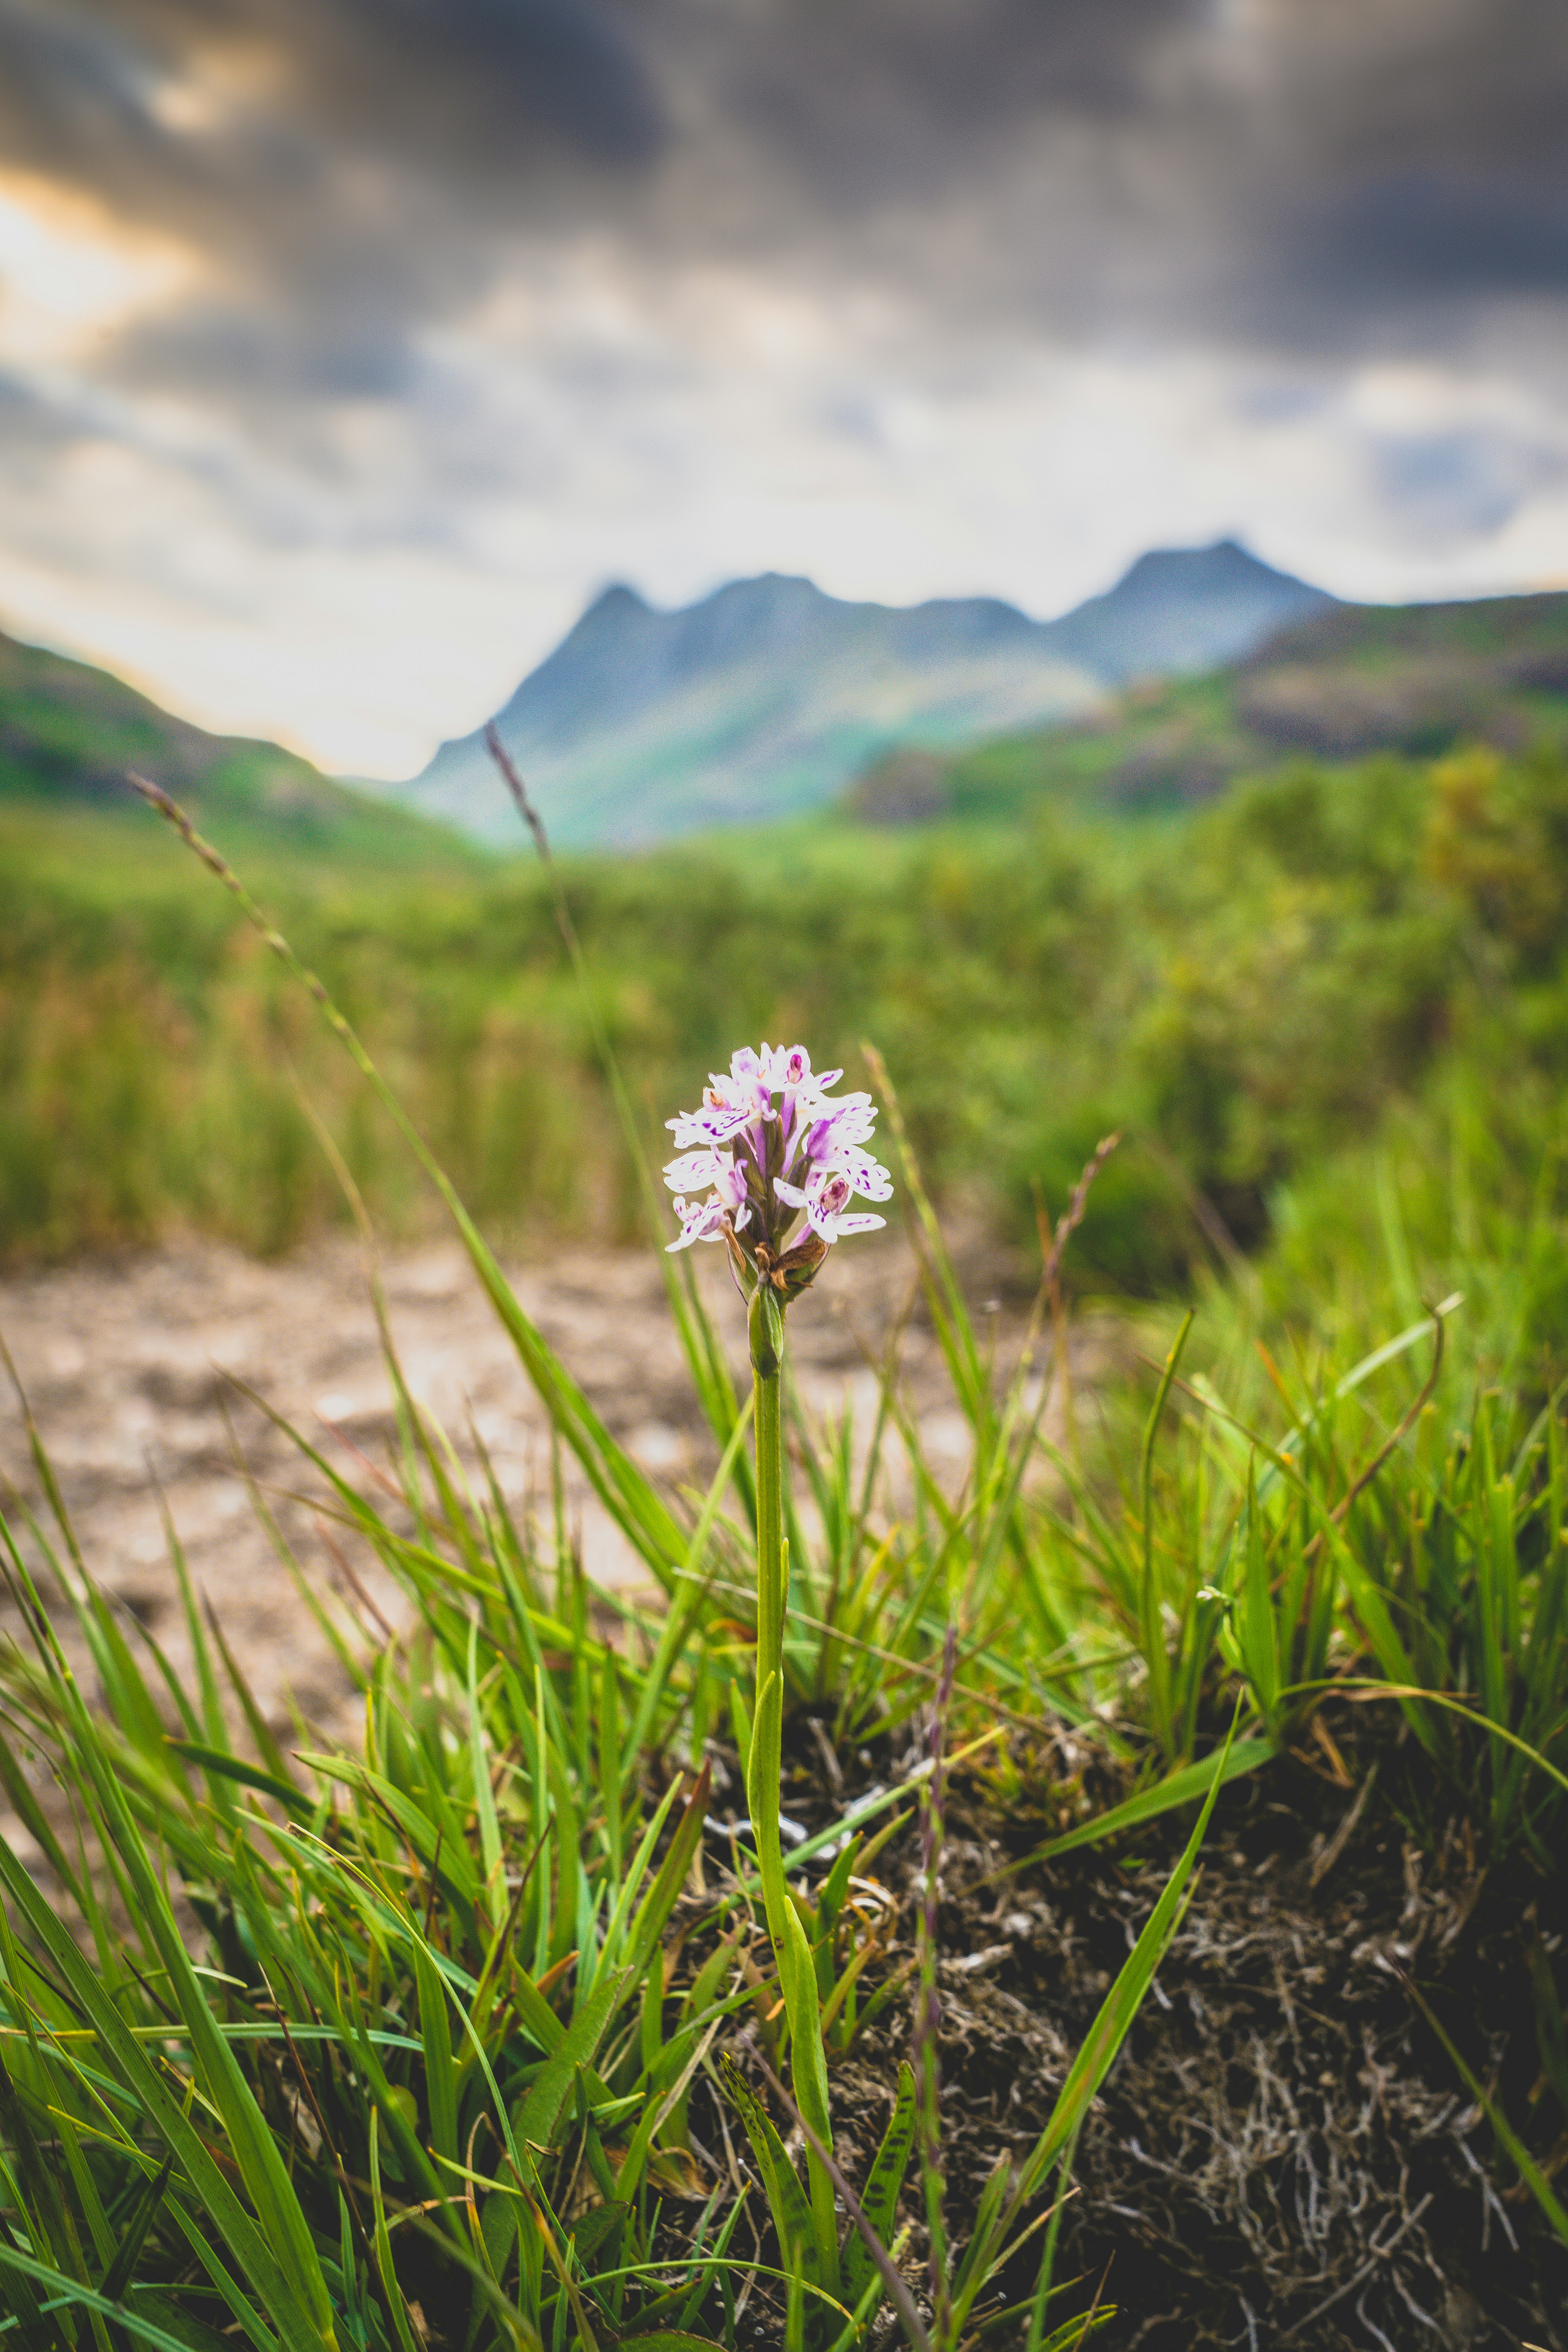 white and purple flower on green grass field during daytime